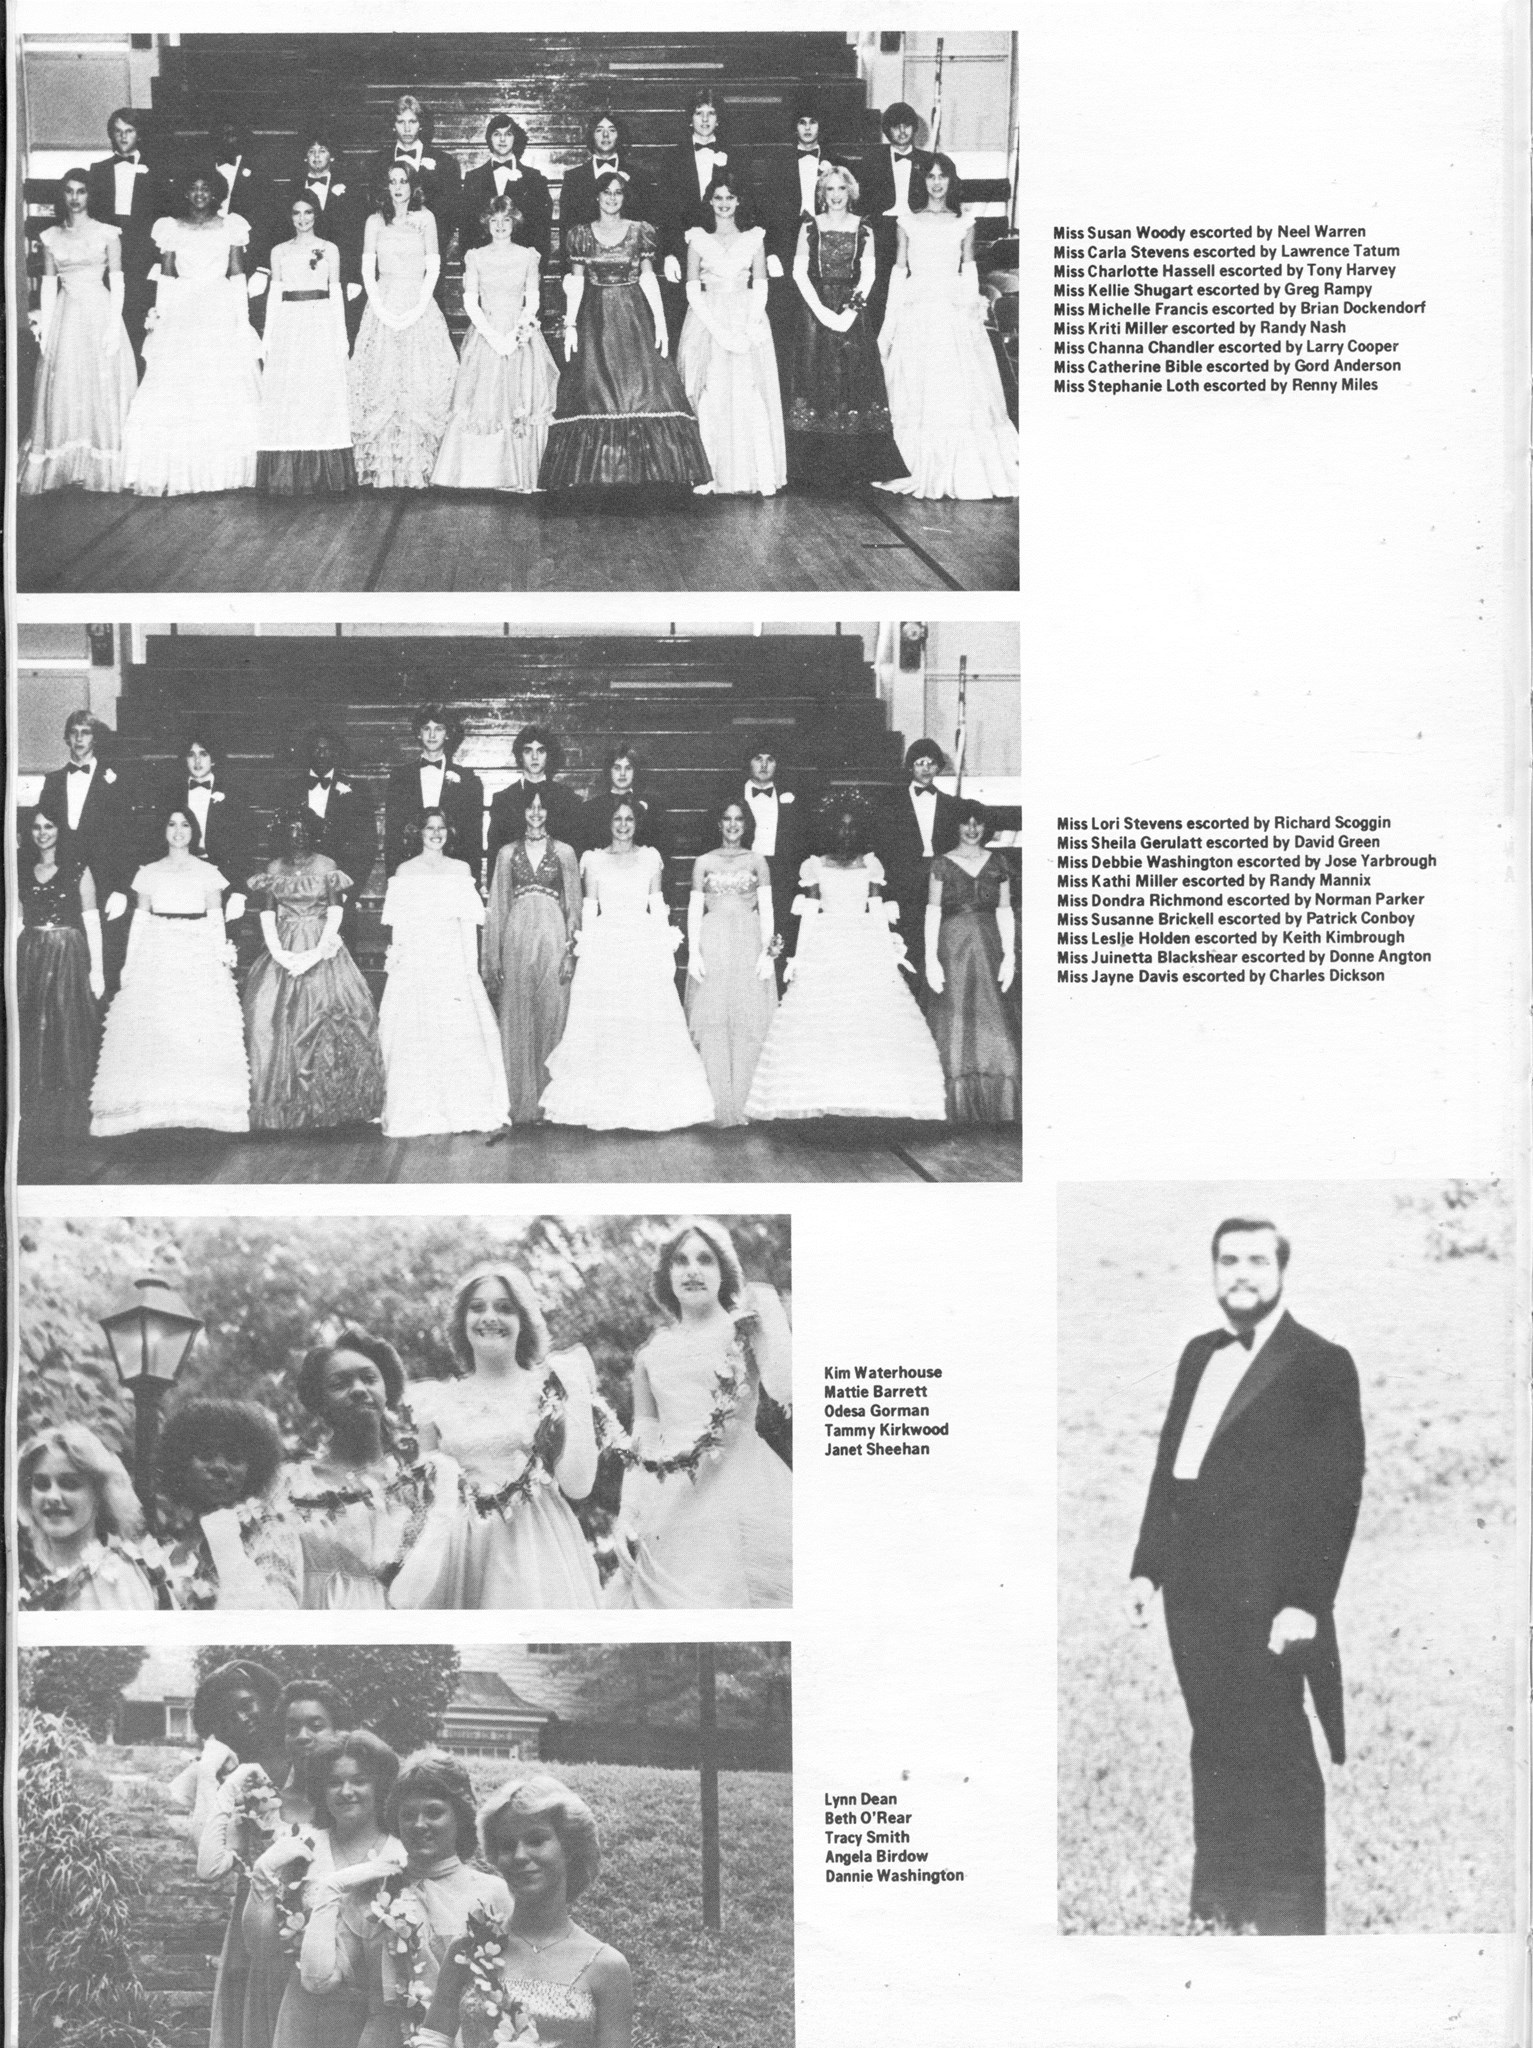 ../../../Images/Large/1980/Arclight-1980-pg0036.jpg